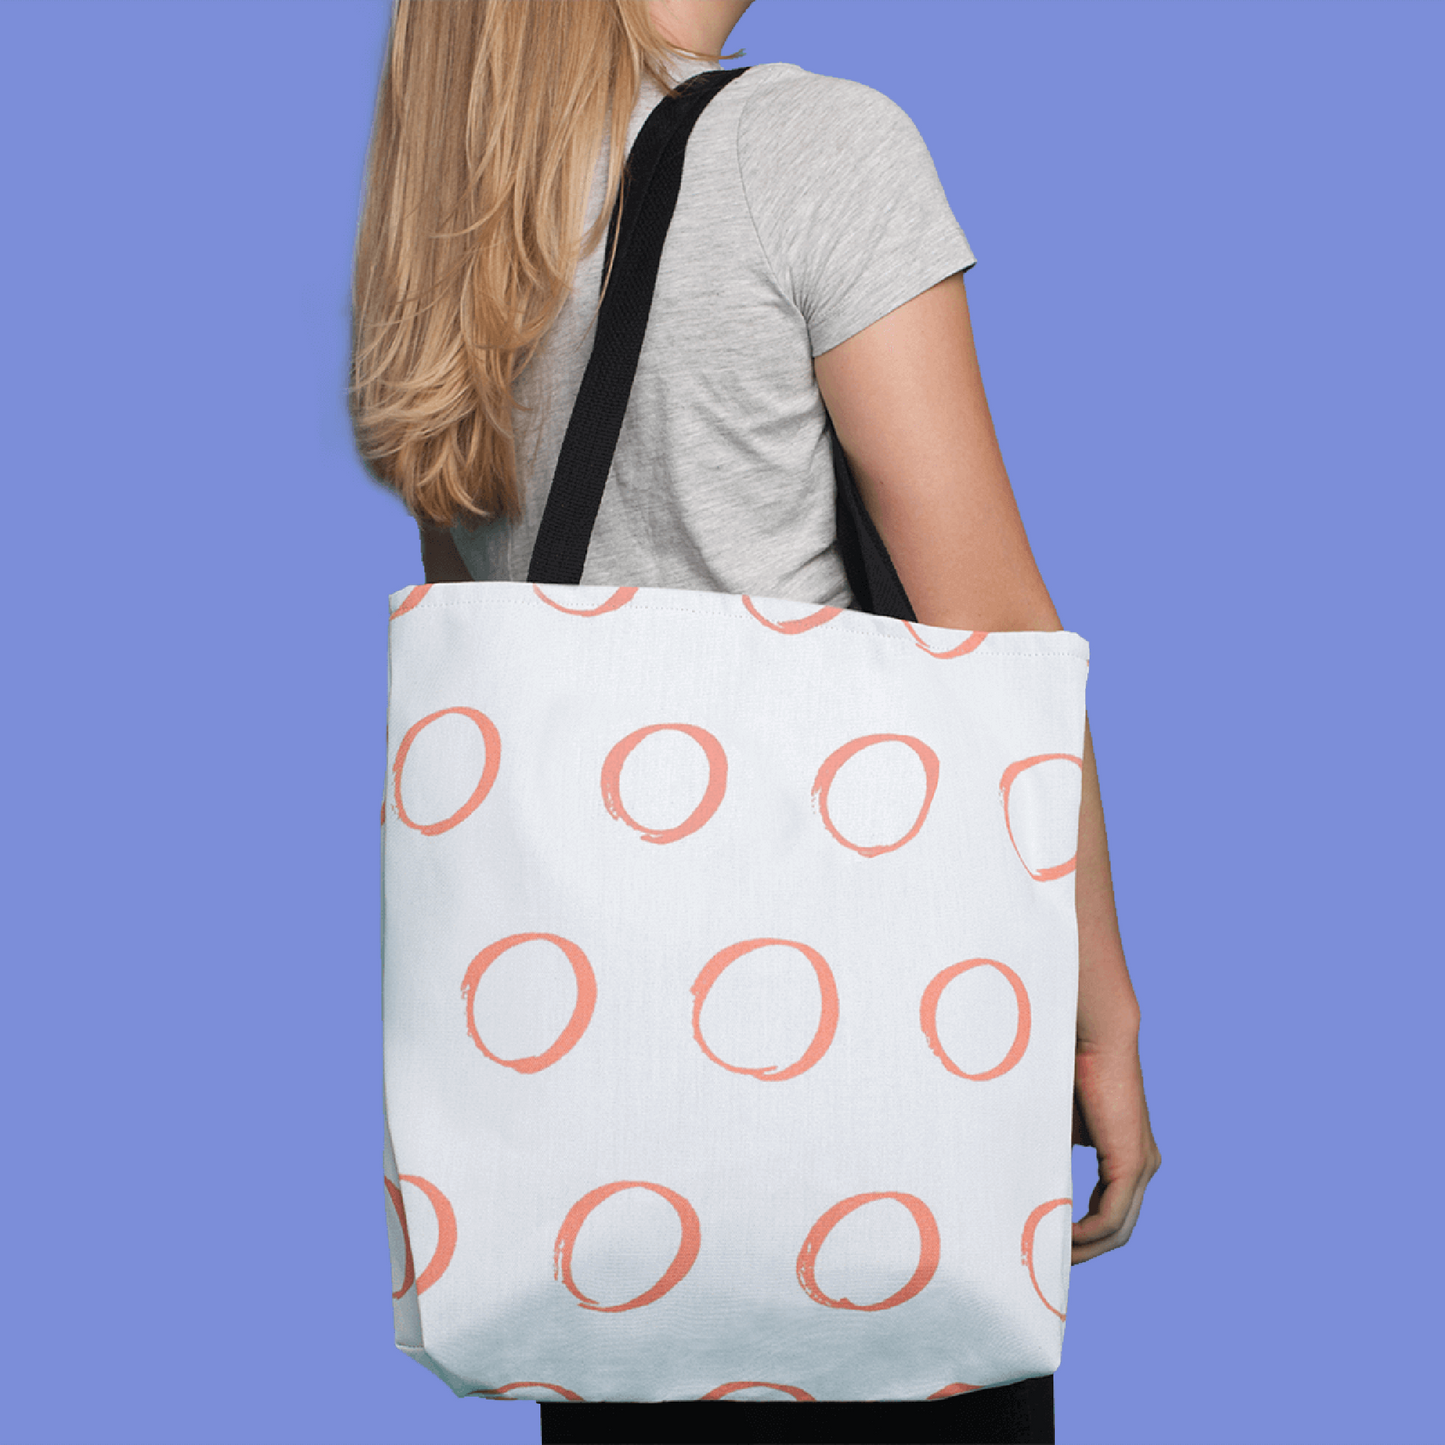 Floral Tote Bag, Tote Bags for Women, Shoulder Tote Bag, Bags for Women